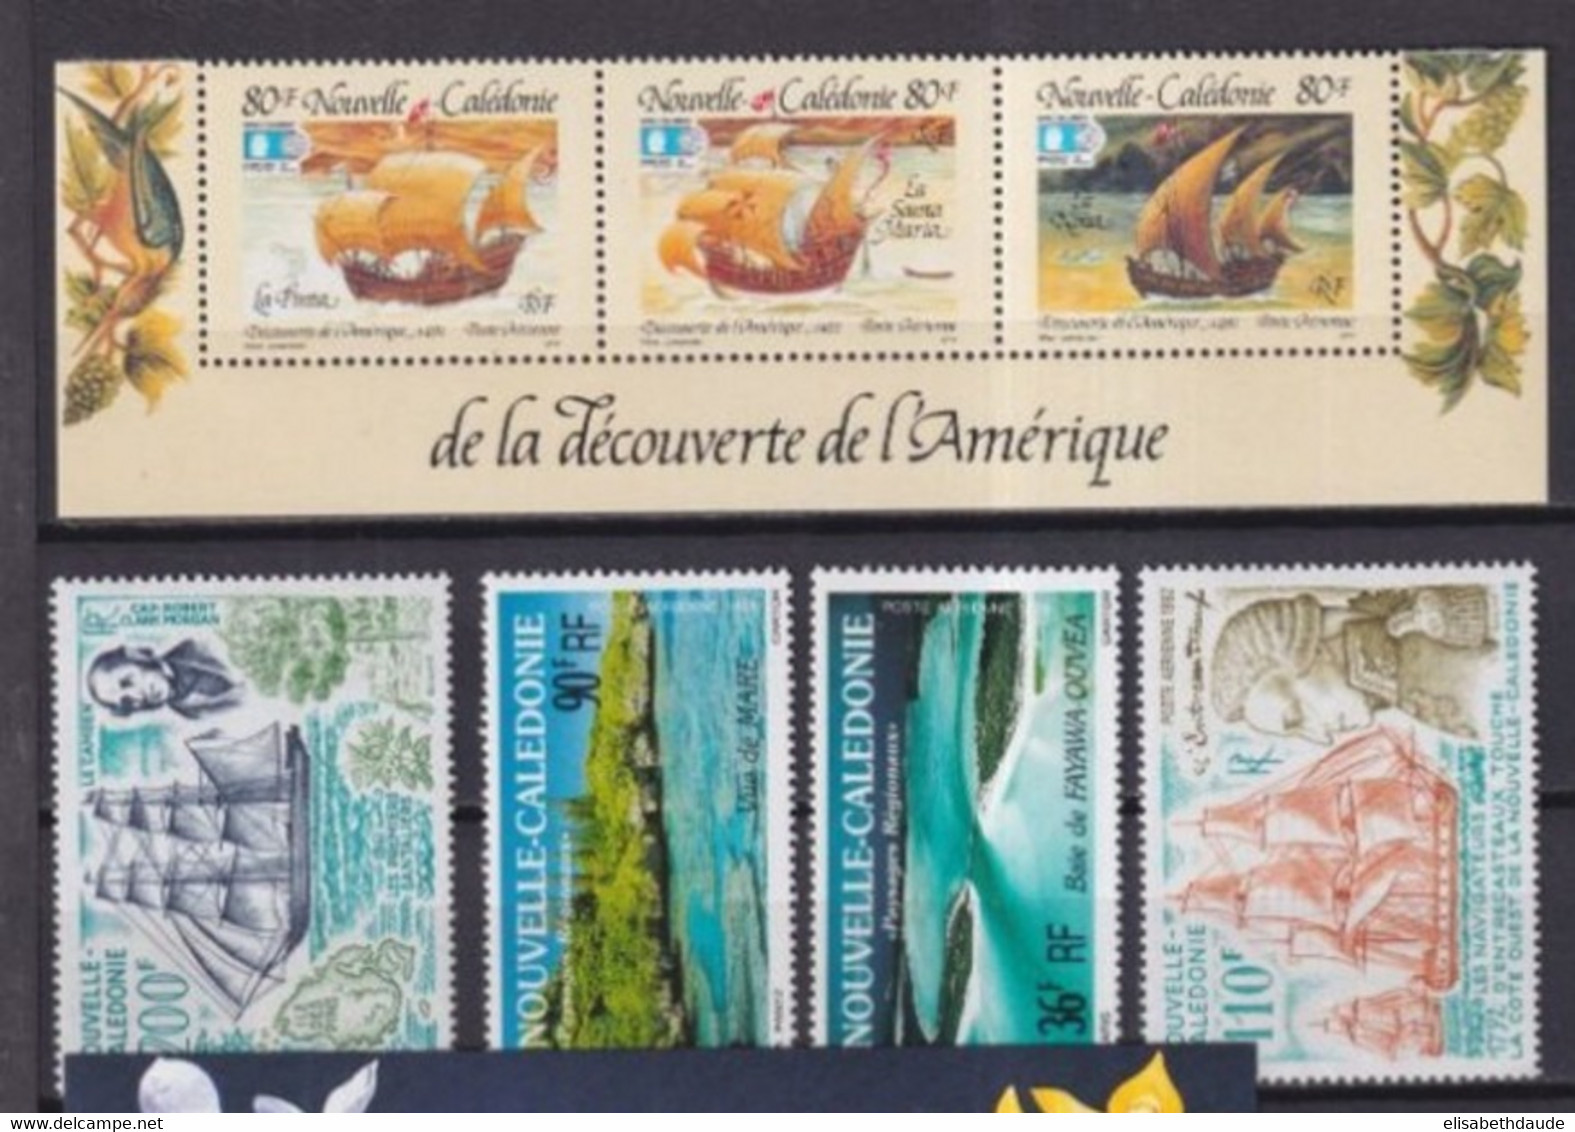 CALEDONIE - 1990/92 - COLLECTION 2 PAGES ! ** MNH - COTE YVERT 2017 = 106.1 EUR - Neufs